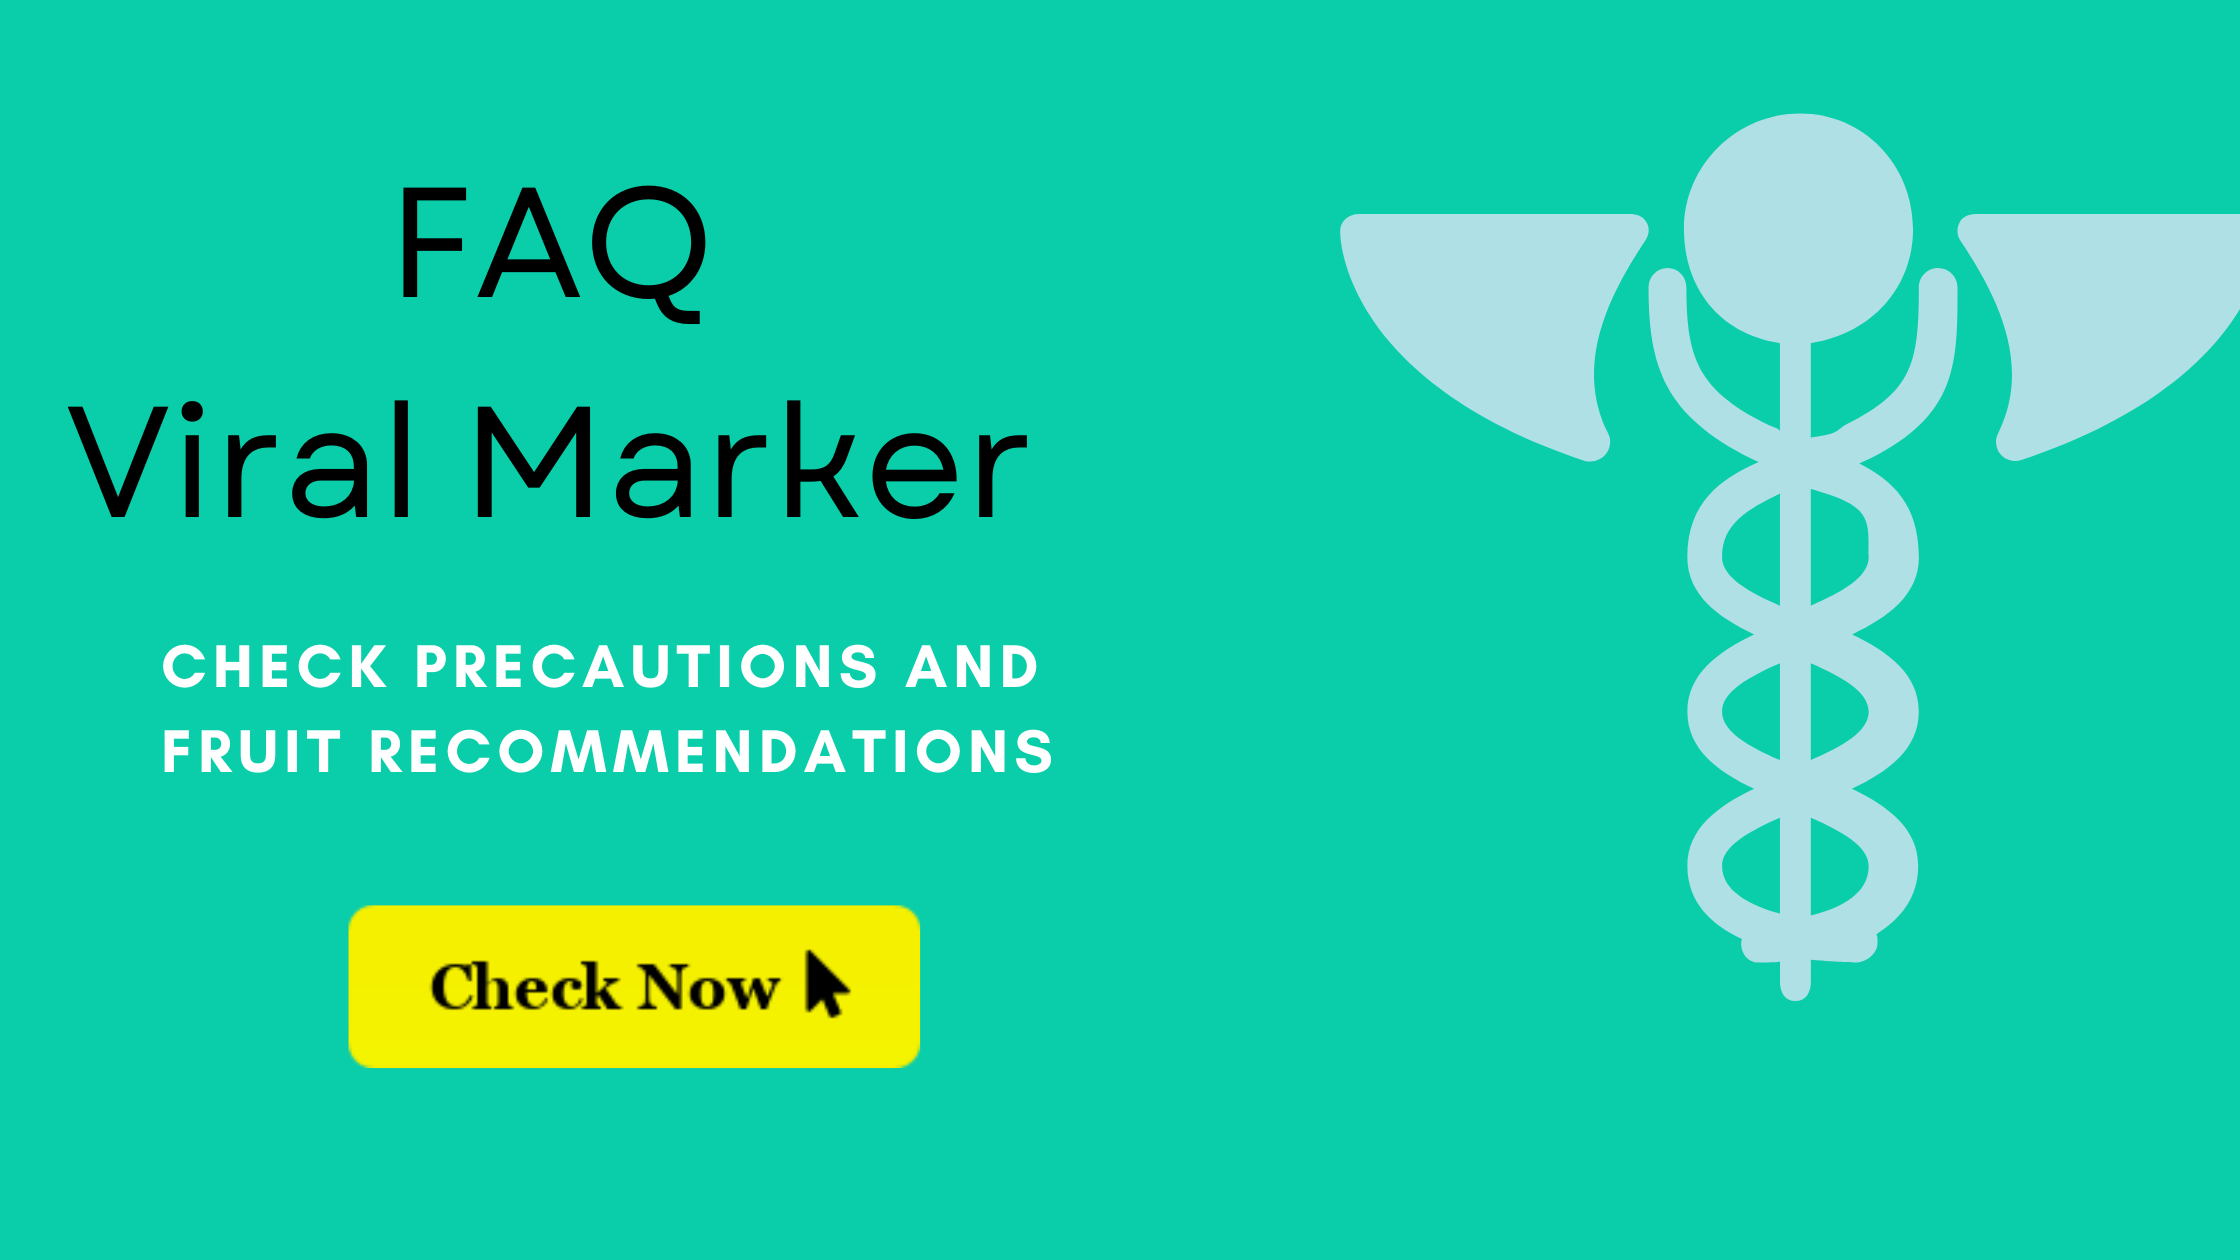 FAQs About Viral Marker Test and Health Checkup popular in India